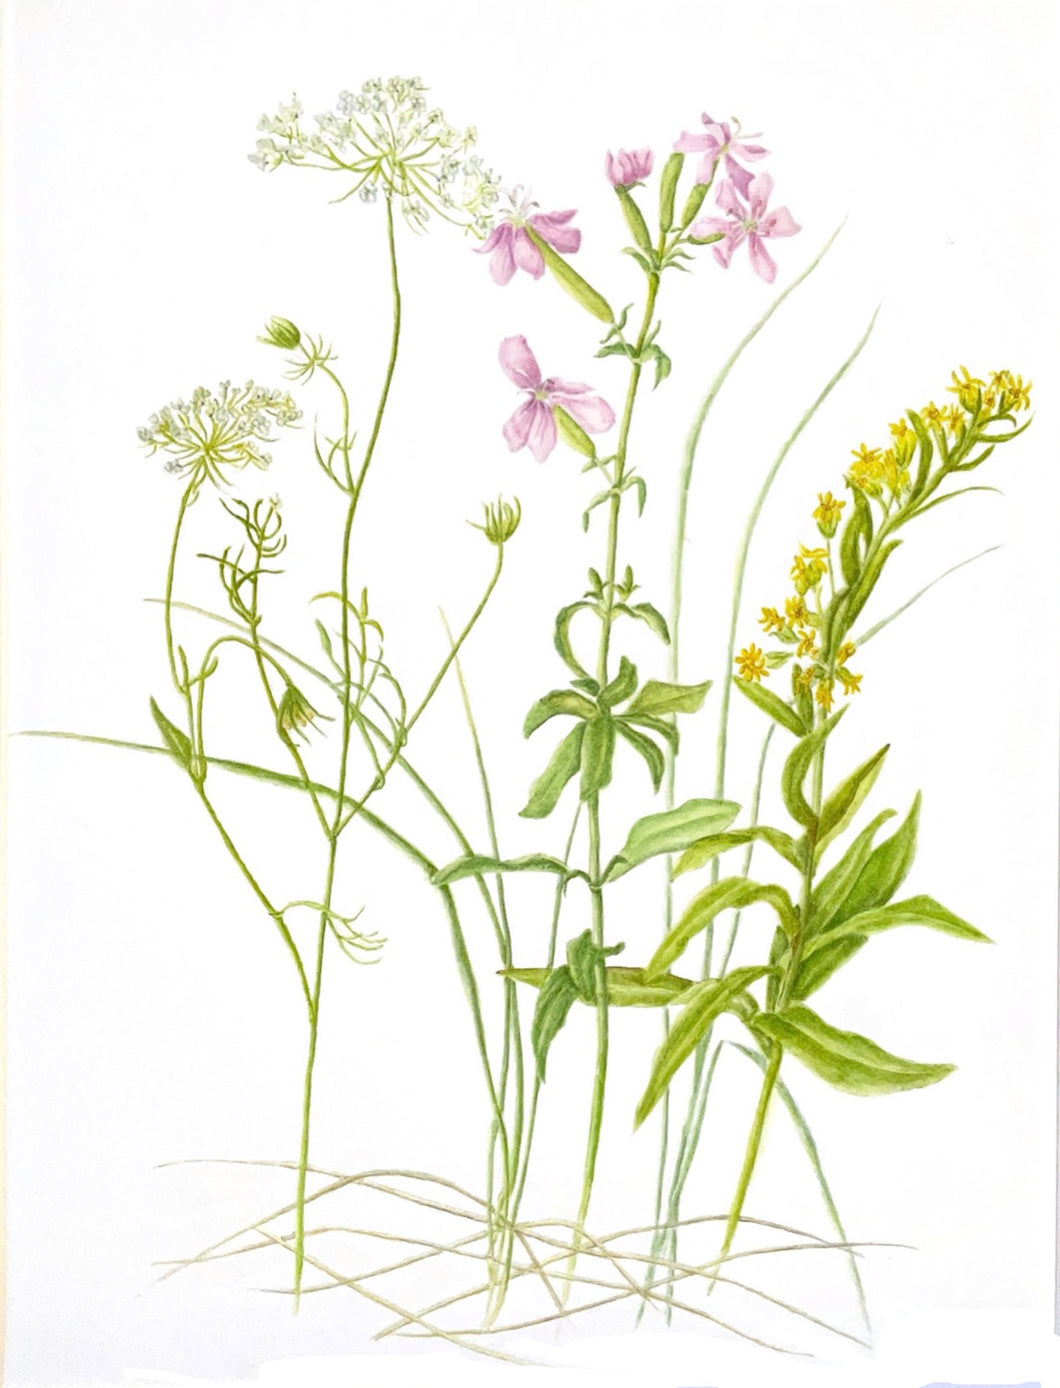 September Wildflowers West Dennis Beach Watercolor Botanical Print on Hahnemuhle 11x14 with Mat signed